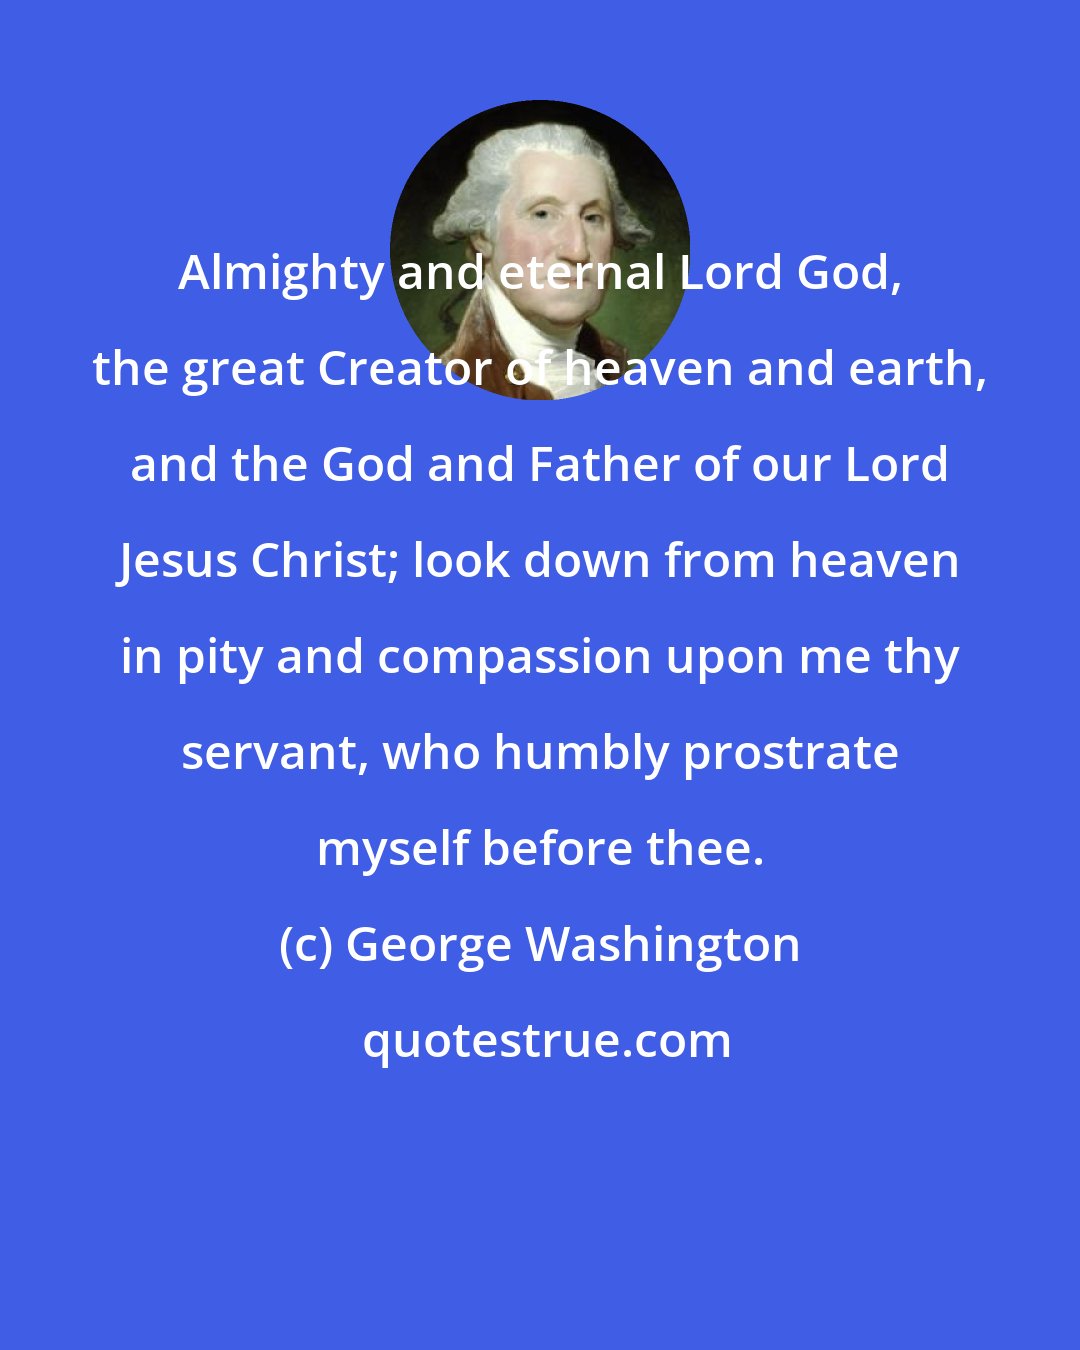 George Washington: Almighty and eternal Lord God, the great Creator of heaven and earth, and the God and Father of our Lord Jesus Christ; look down from heaven in pity and compassion upon me thy servant, who humbly prostrate myself before thee.